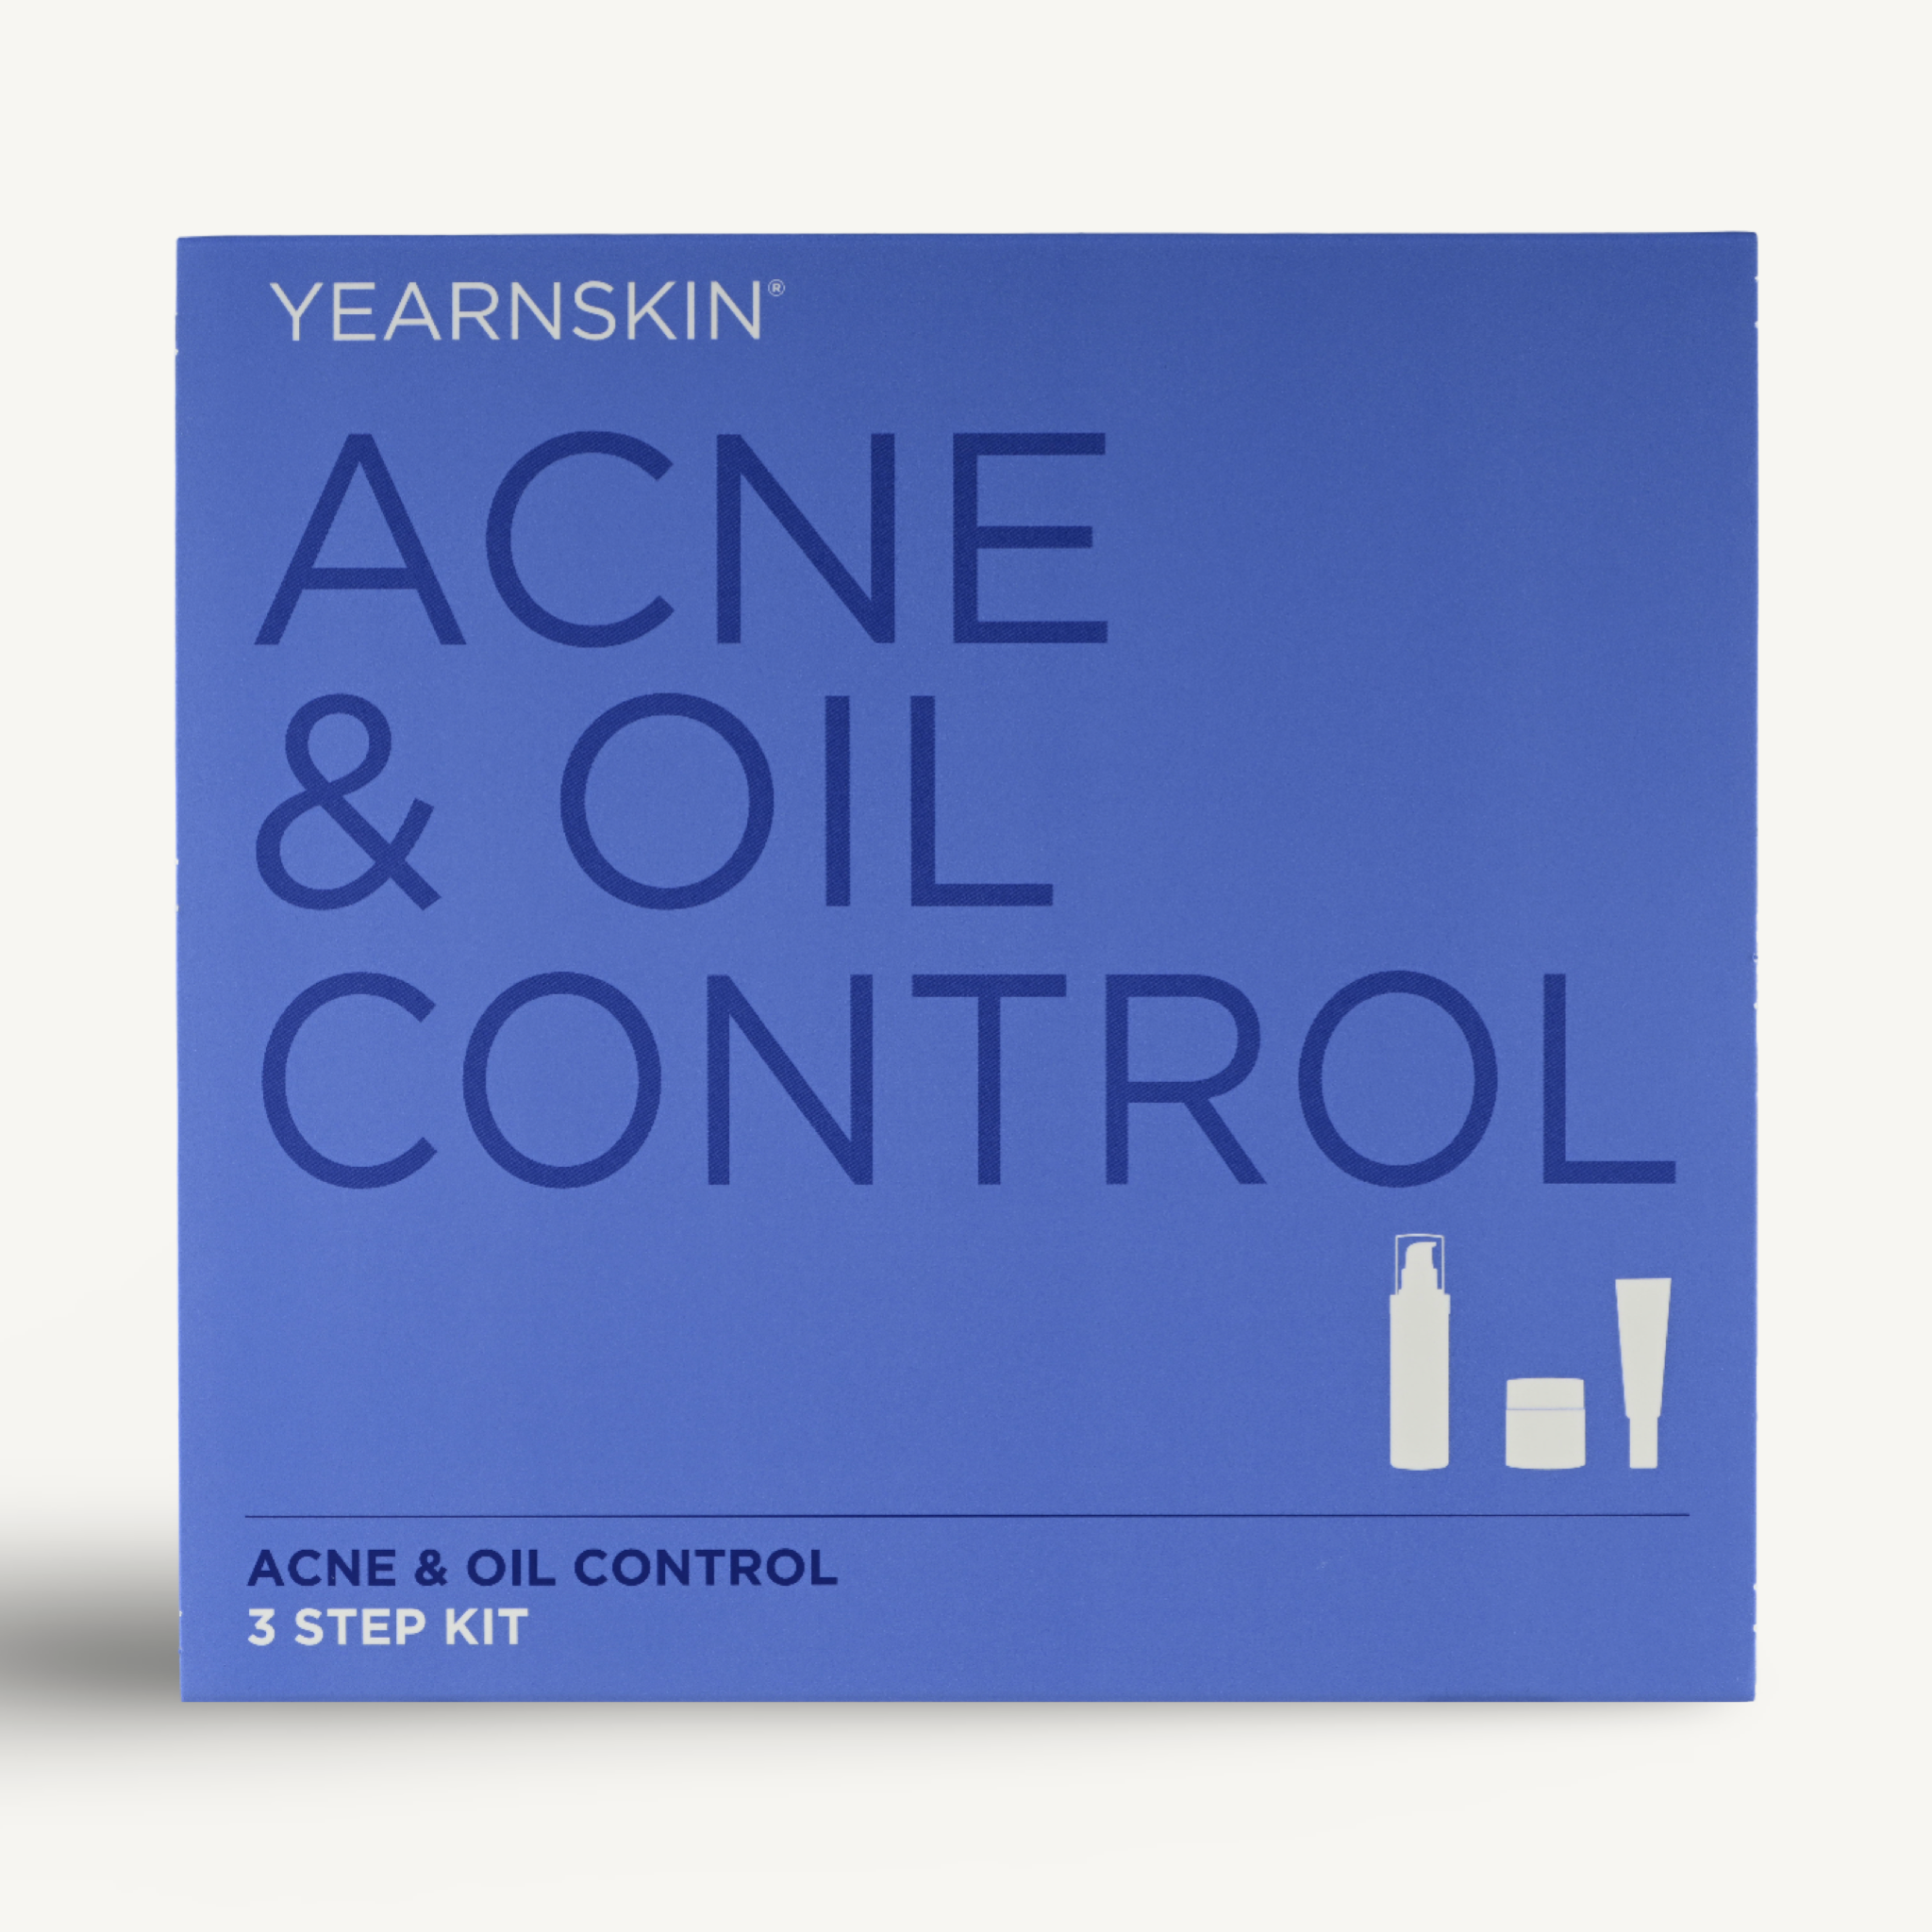 Acne and Oil Control Kit - Reduces Breakouts